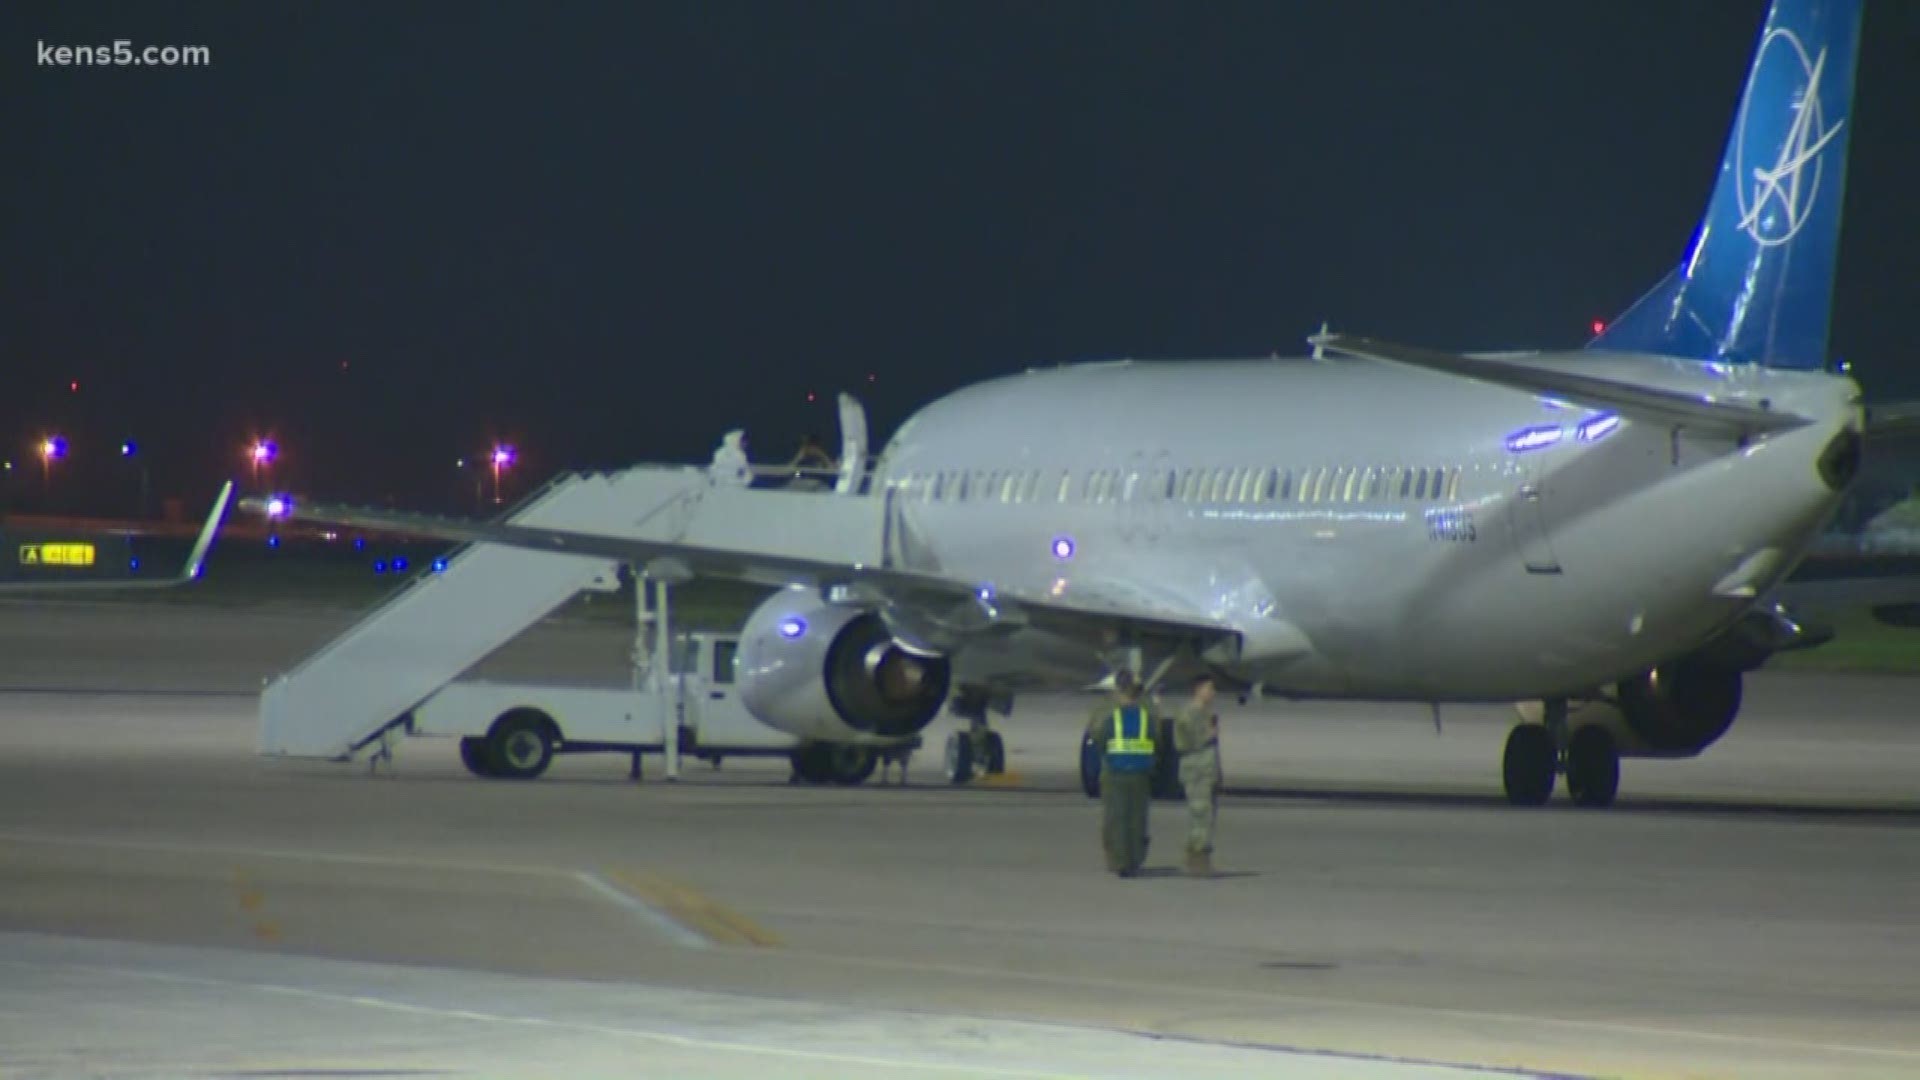 A 737 carrying passengers from the Grand Princess cruise ship arrived at Kelly Field in San Antonio around 8 p.m. Tuesday. None of them have symptoms of coronavirus.